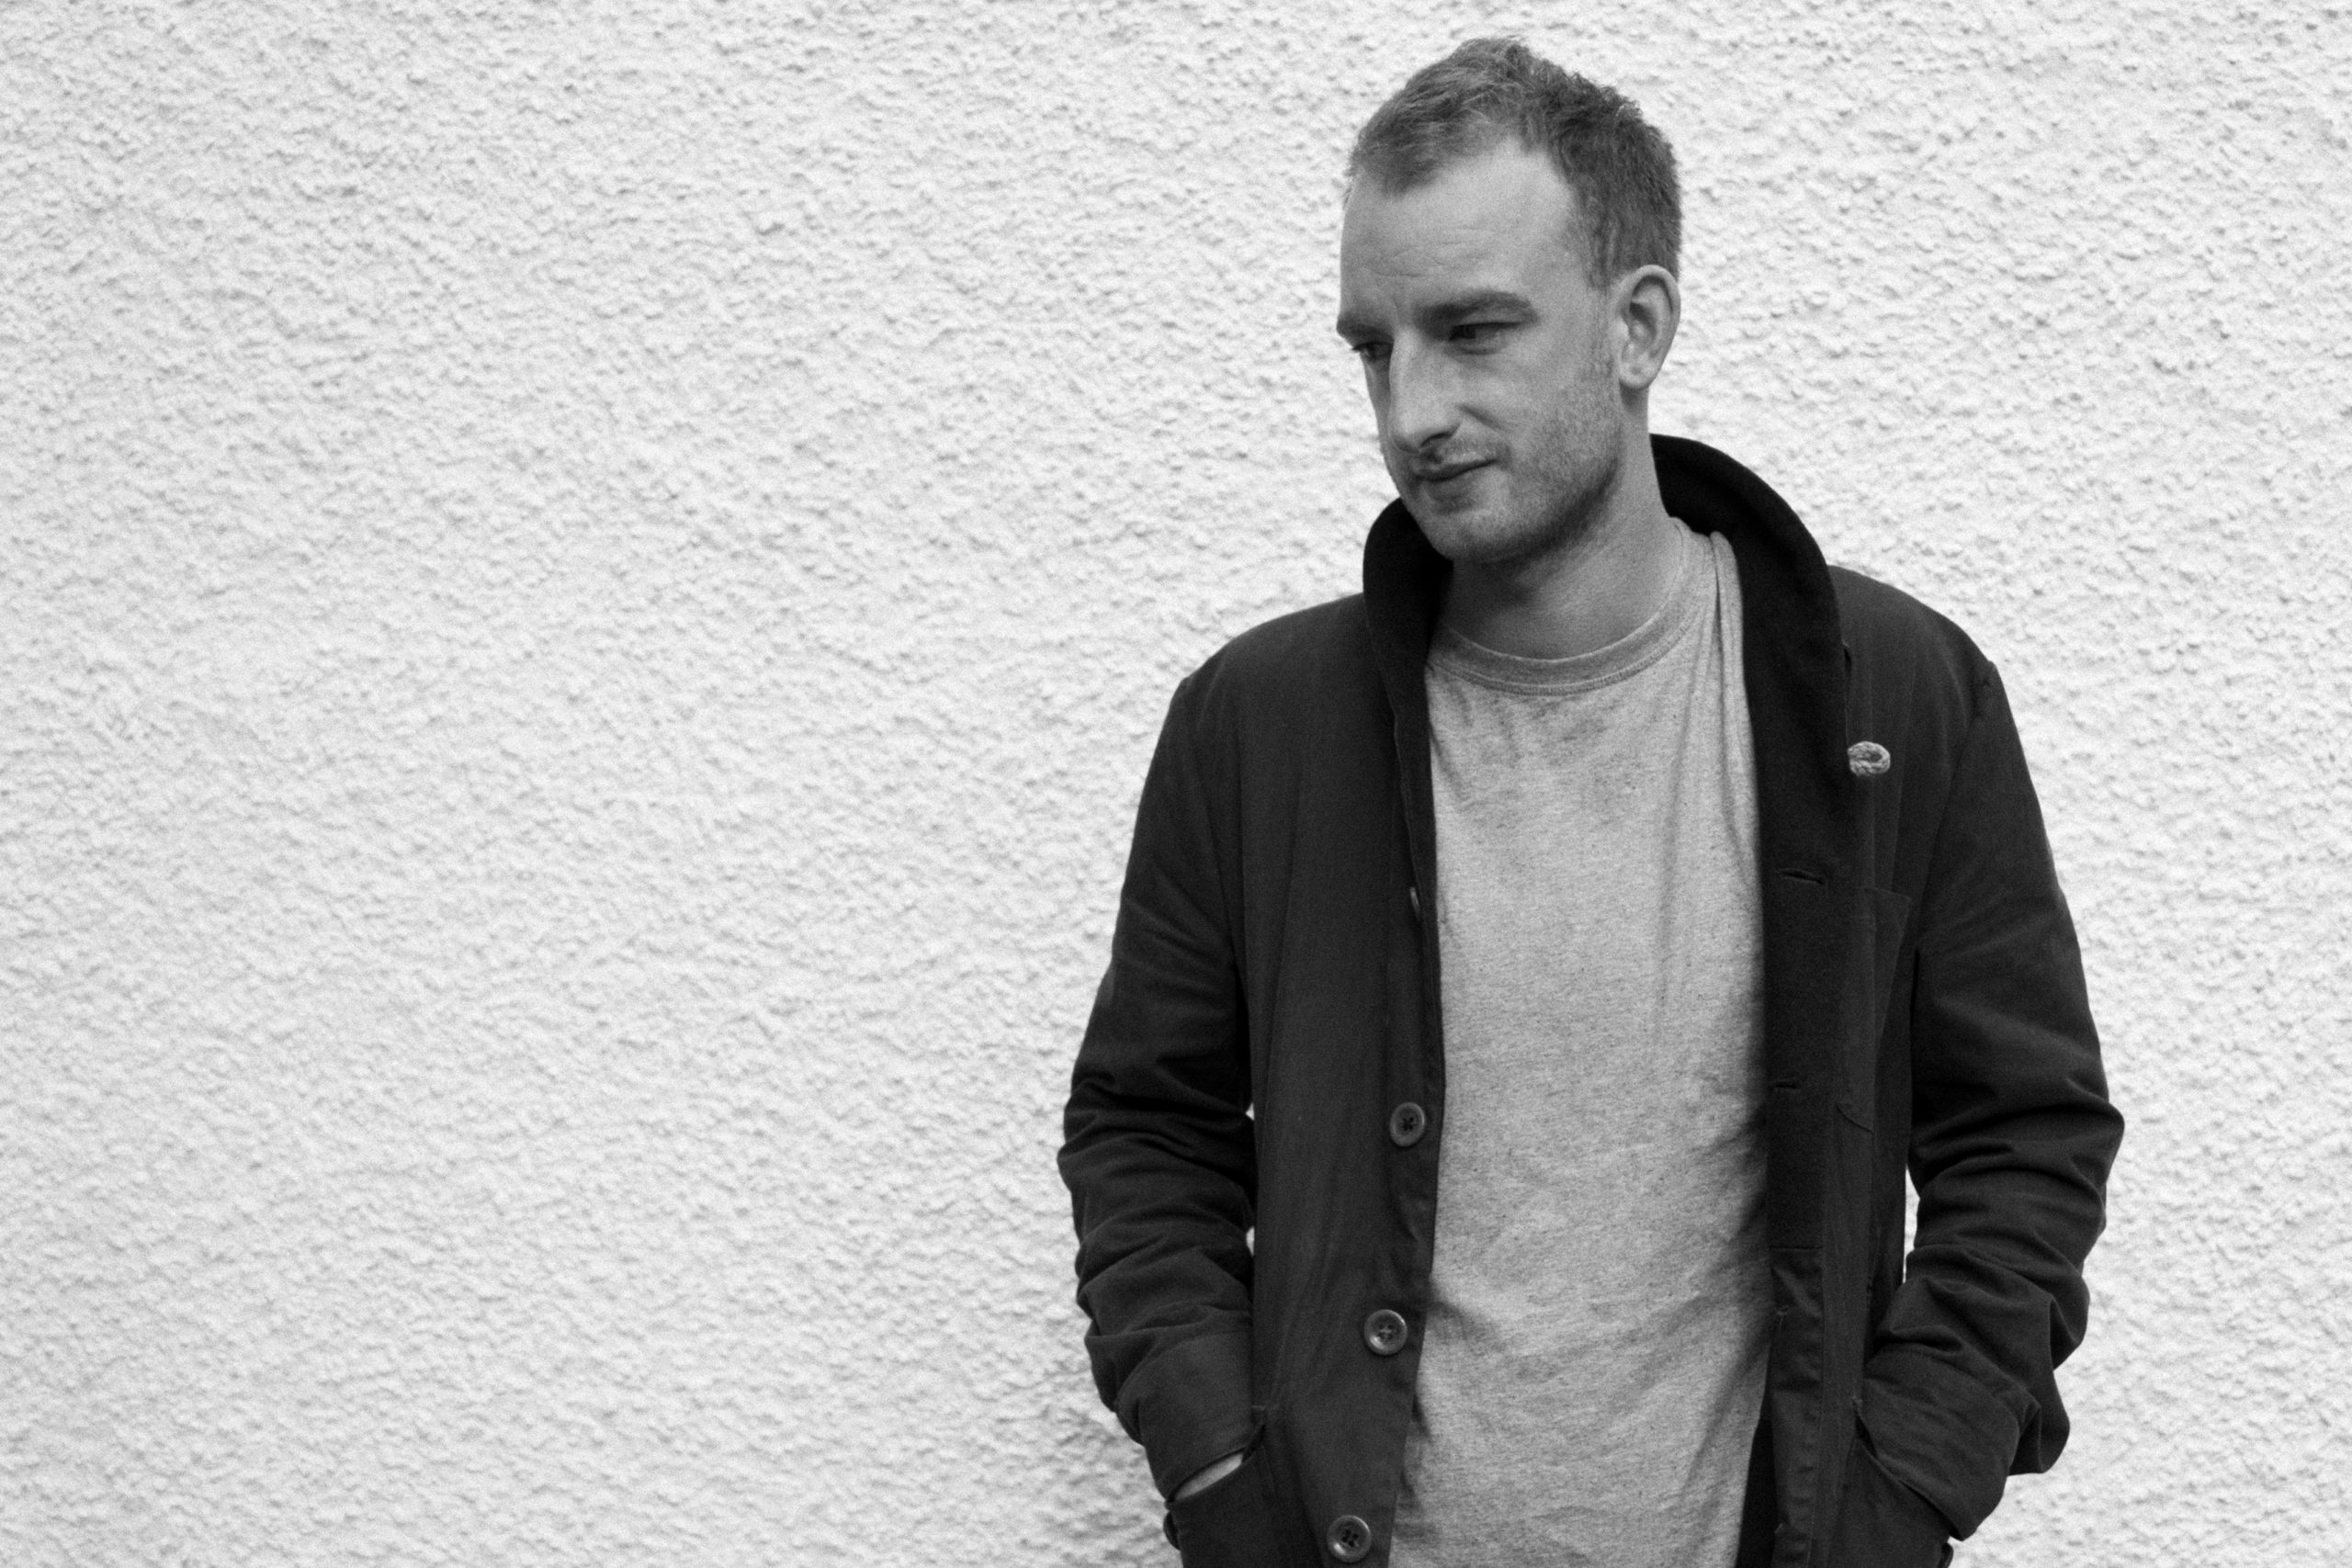 Interview: Kowton at Dimensions Festival